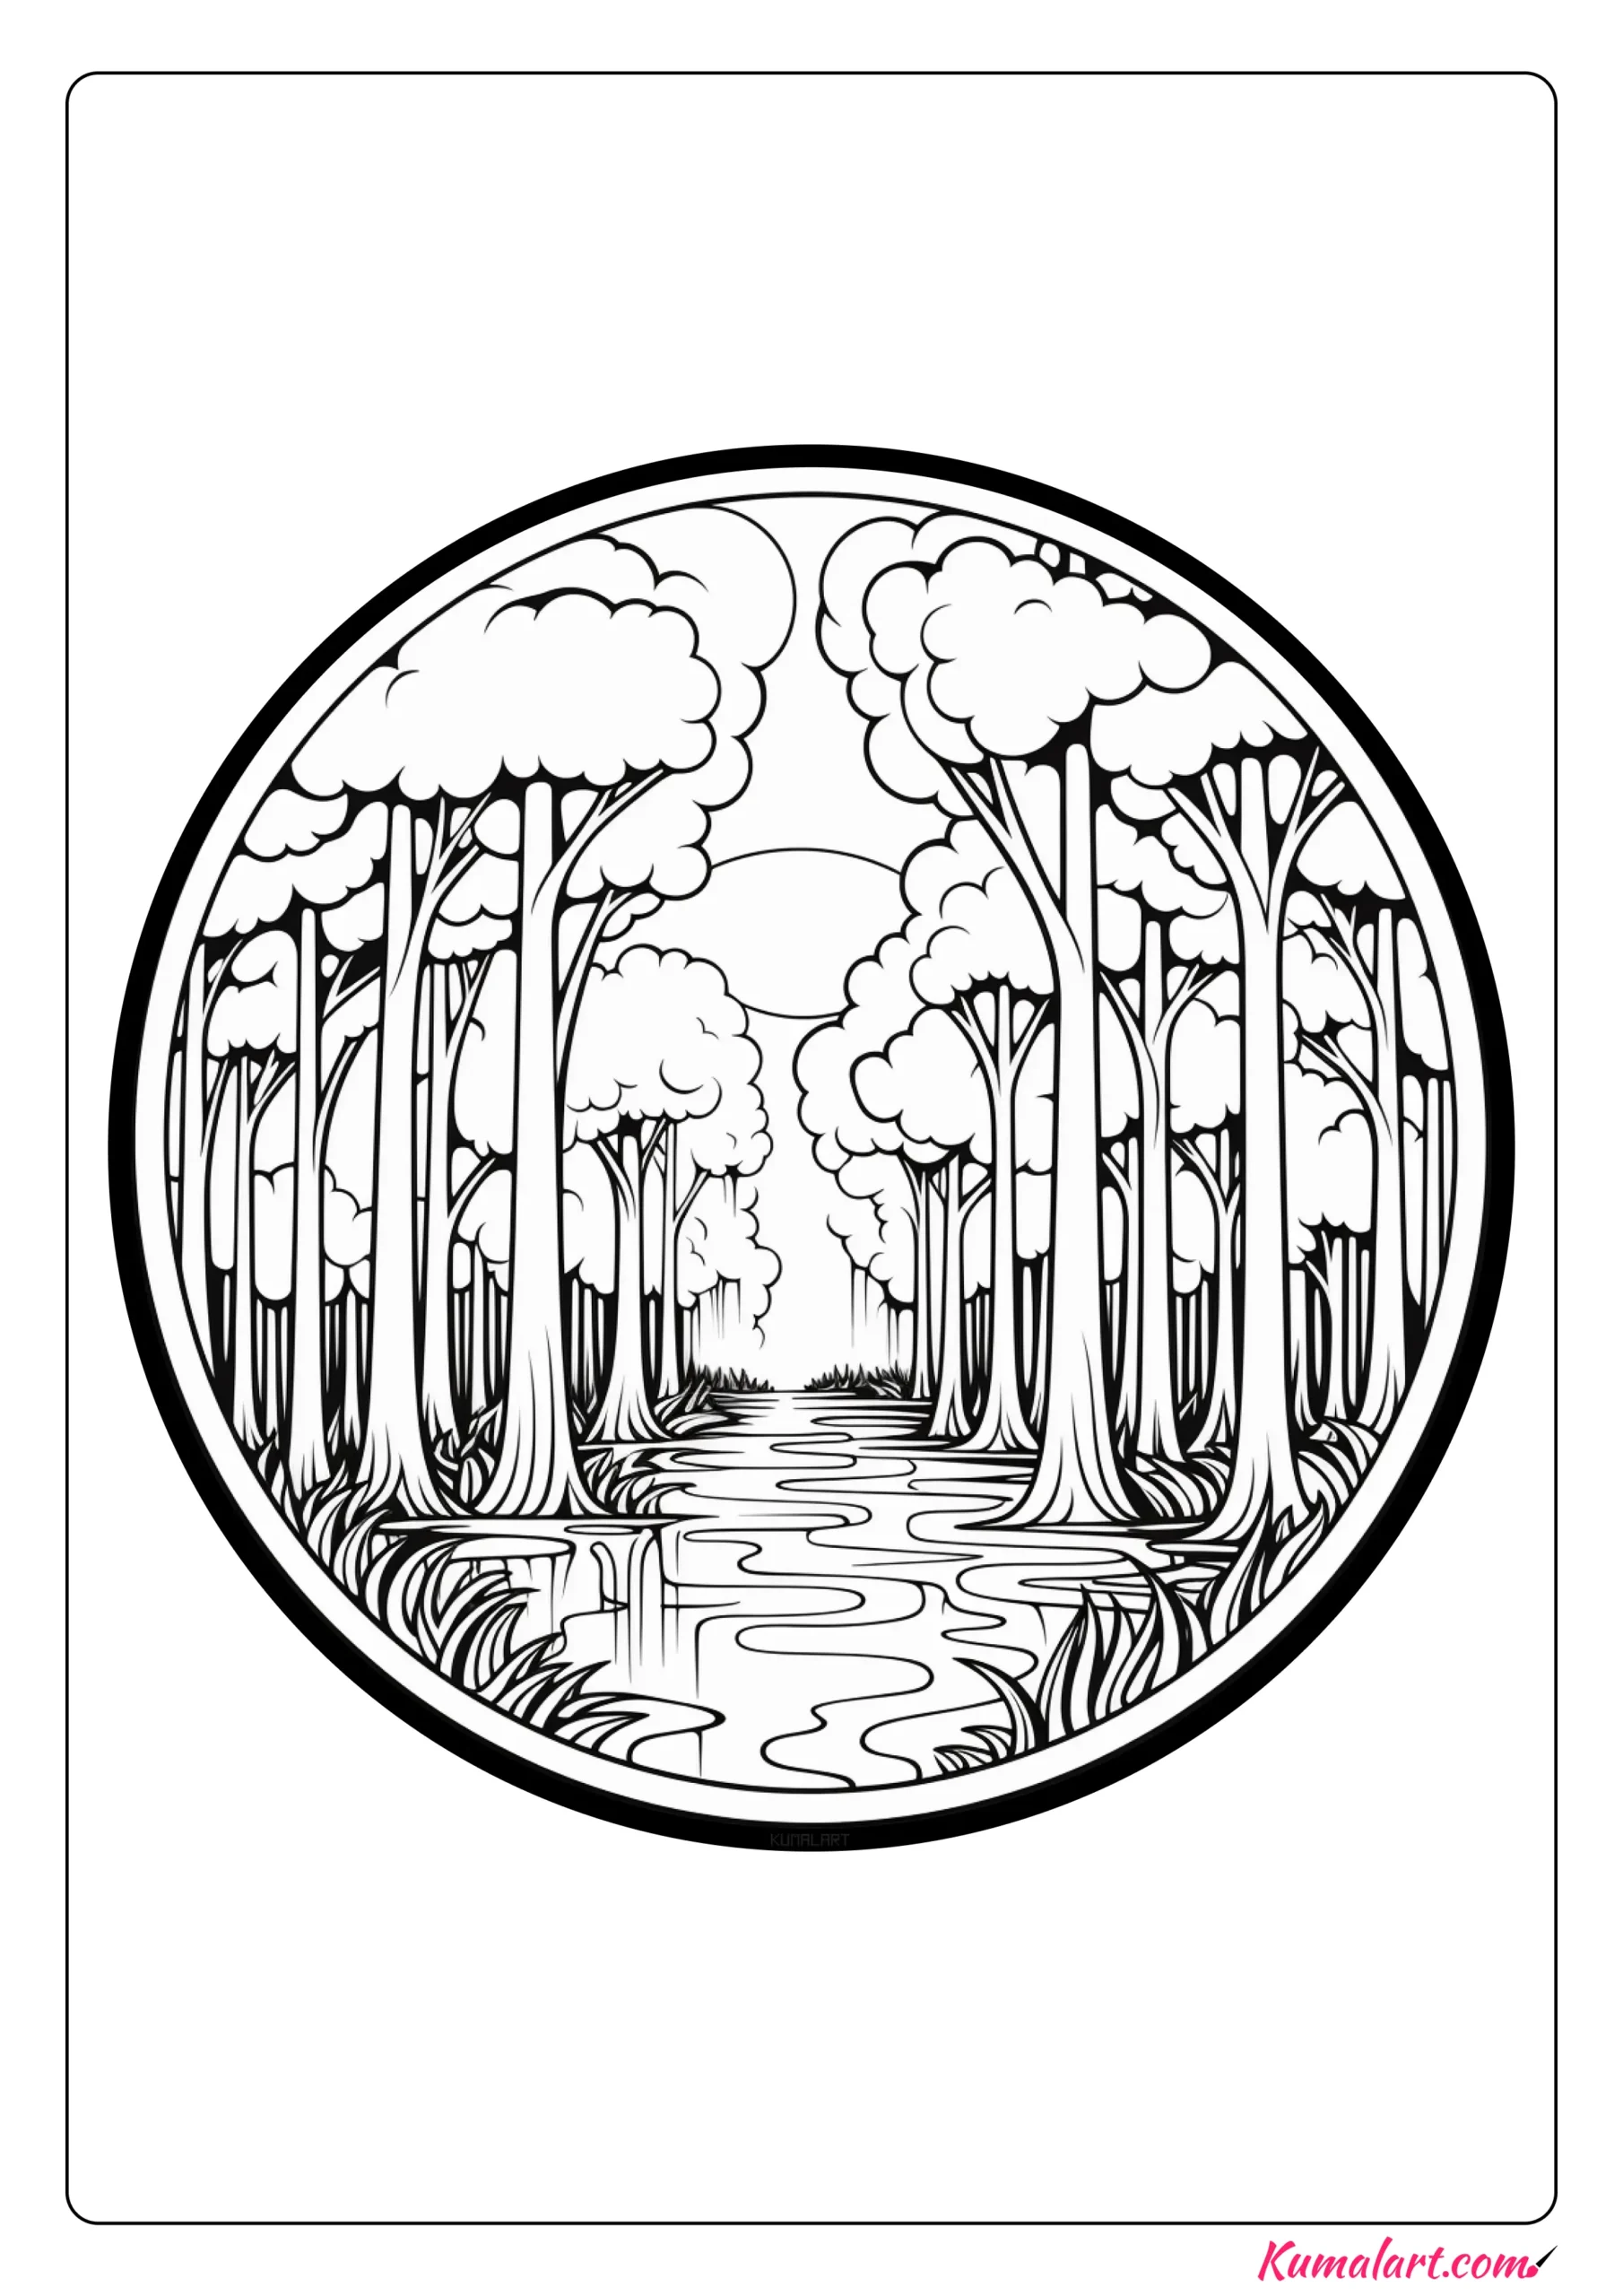 Temperate Rainforest Coloring Page